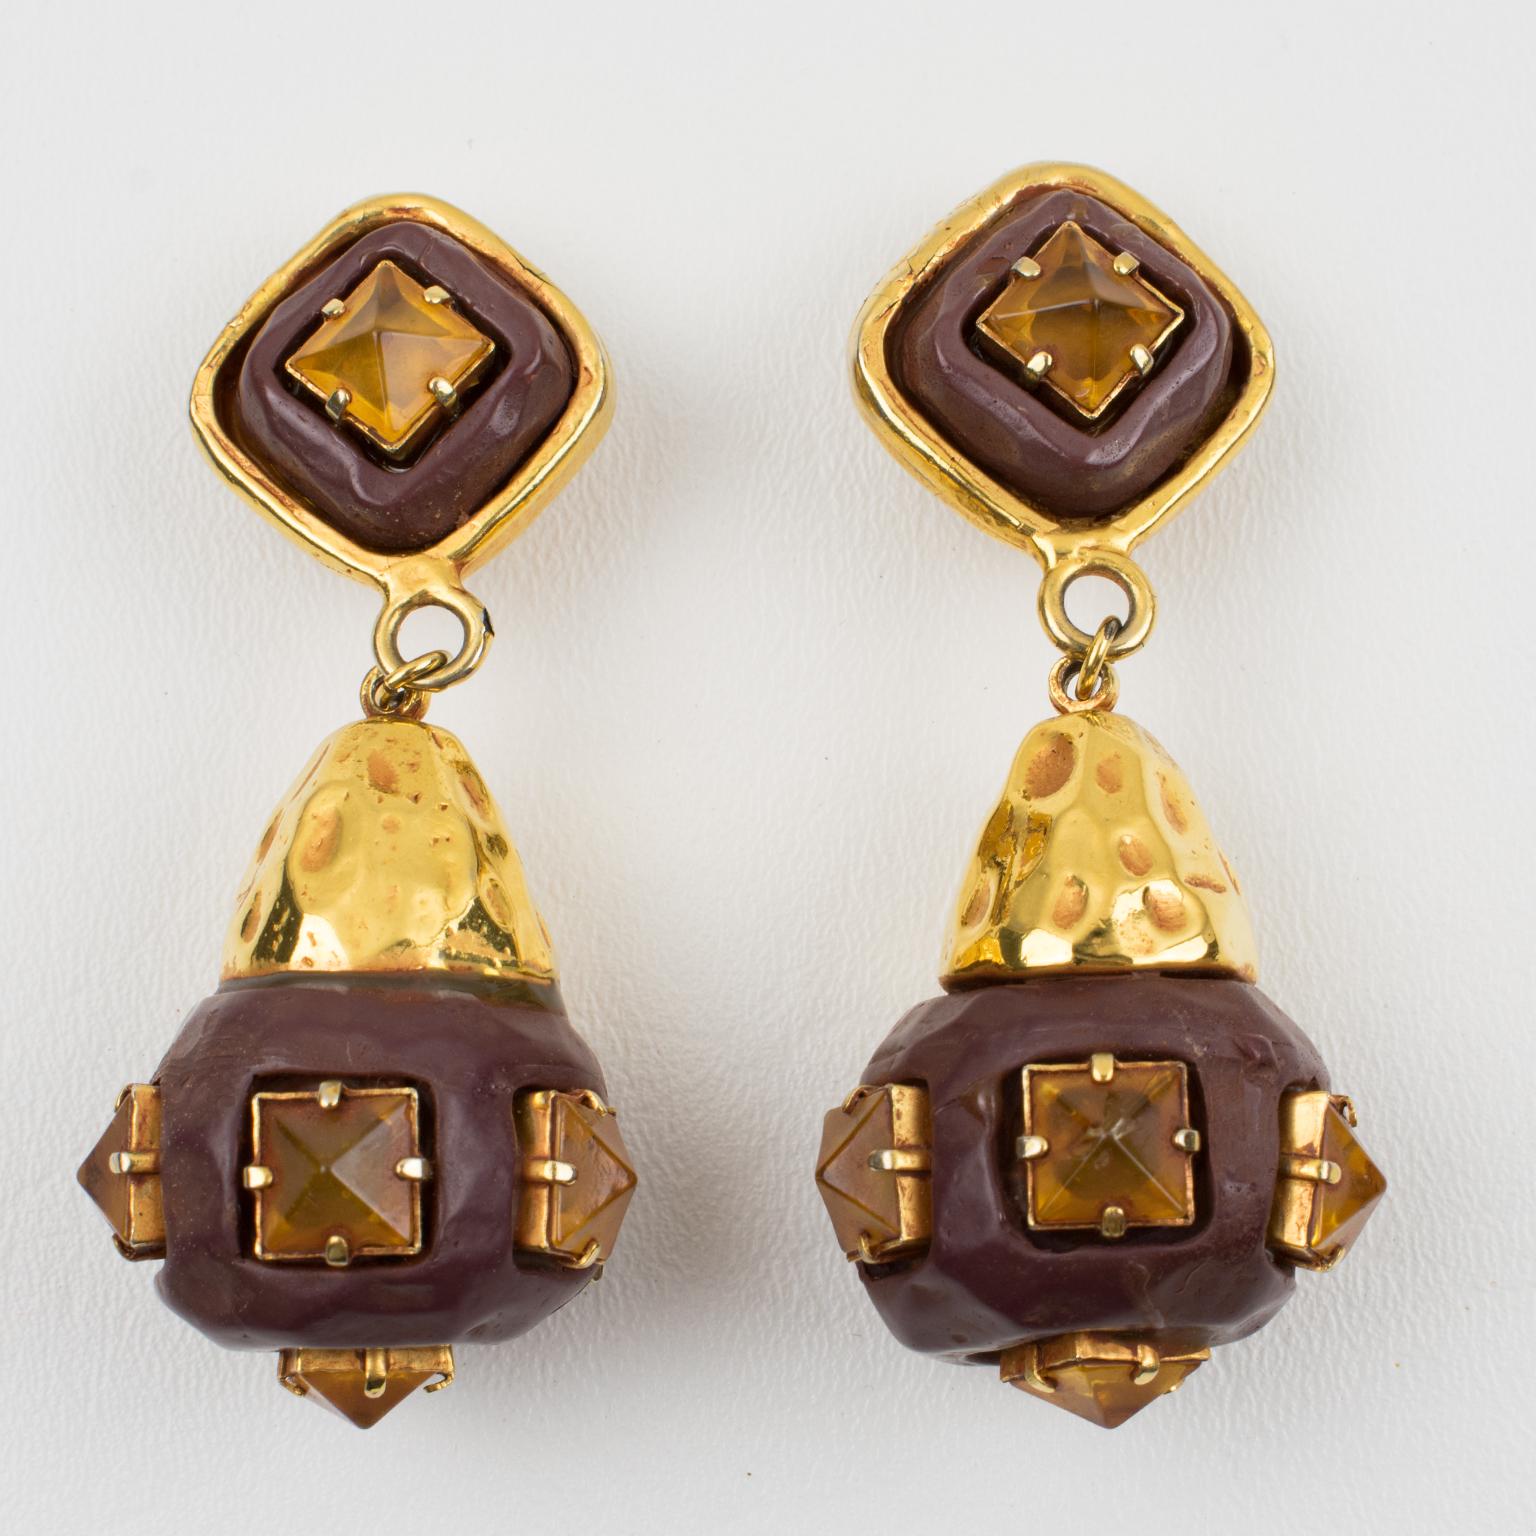 Elegant Kalinger Paris dangling clip-on earrings. Oversized geometric shape featuring gilt metal framing and a large dangle ball in chocolate resin imitating wood all carved and textured topped with amber-colored resin rhinestones. 
Company marking